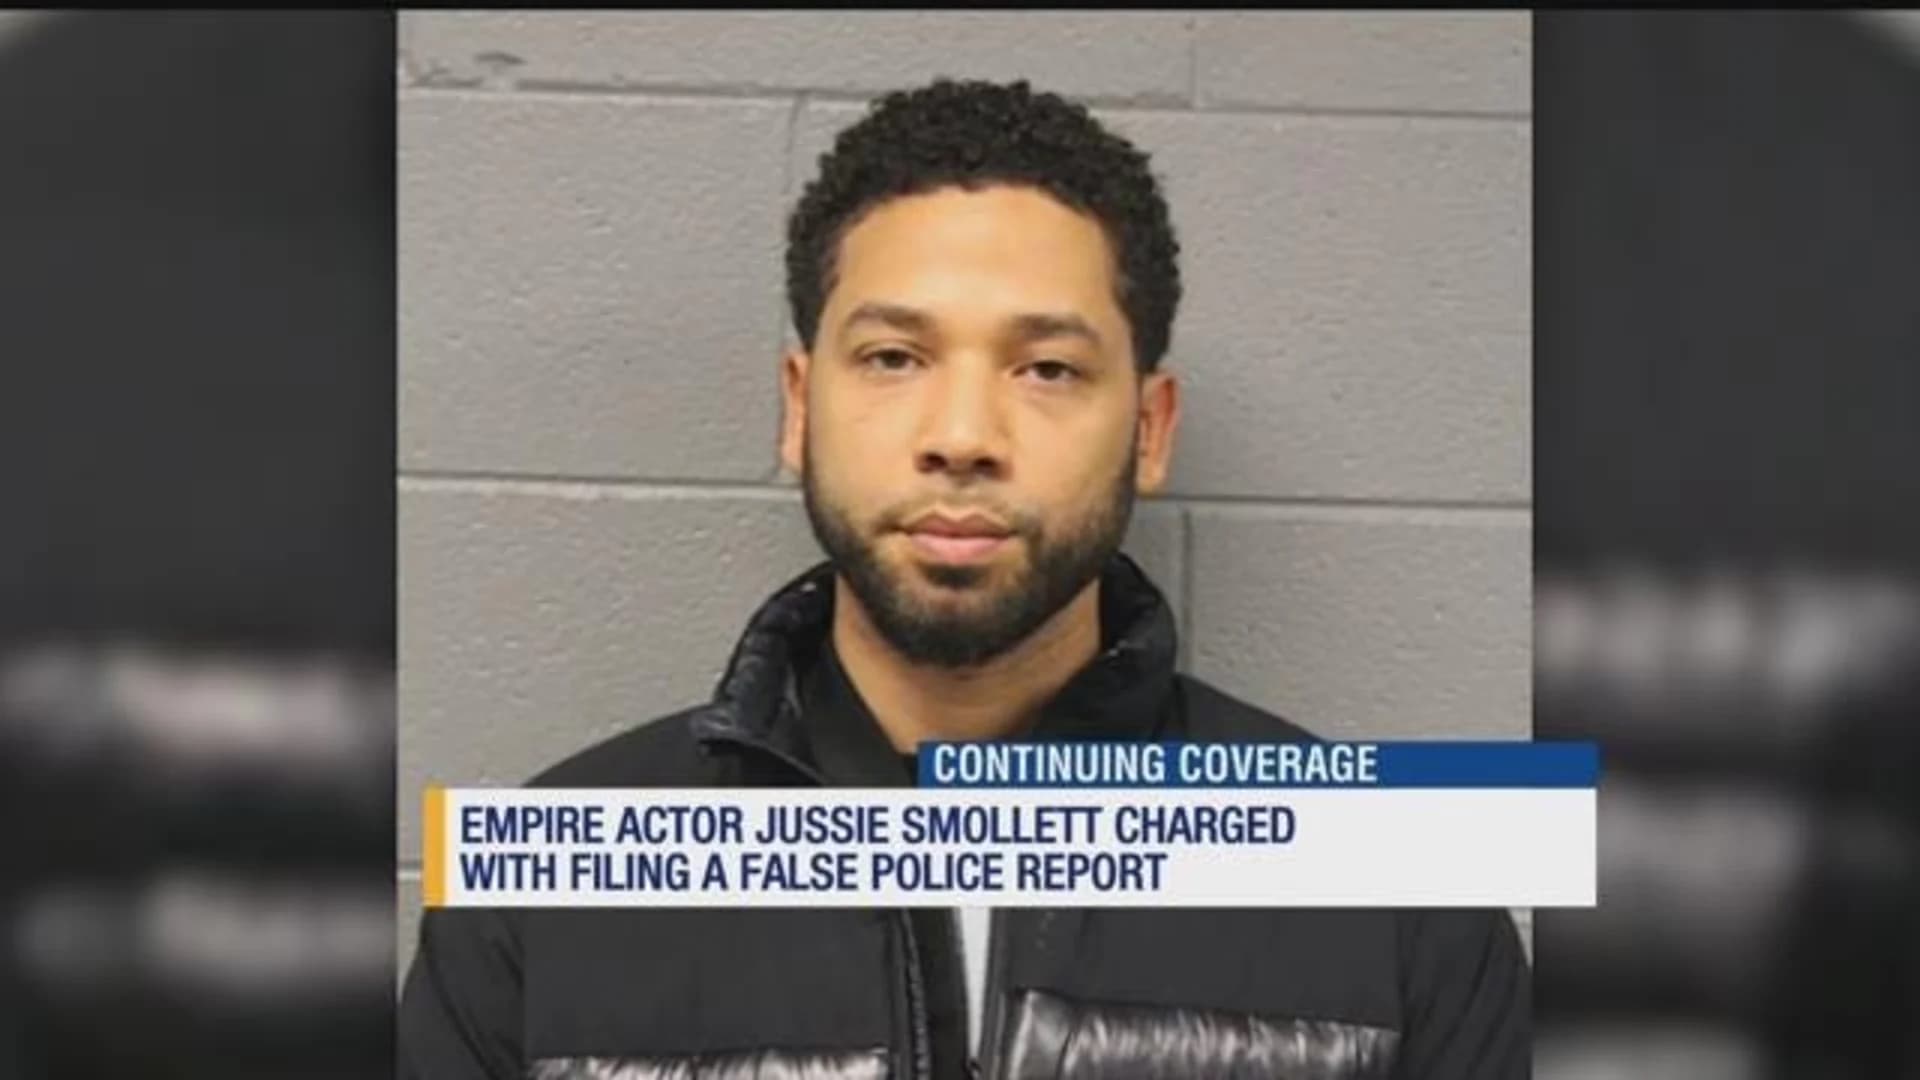 Prosecutors: Smollett paid 2 brothers $35K for staged attack